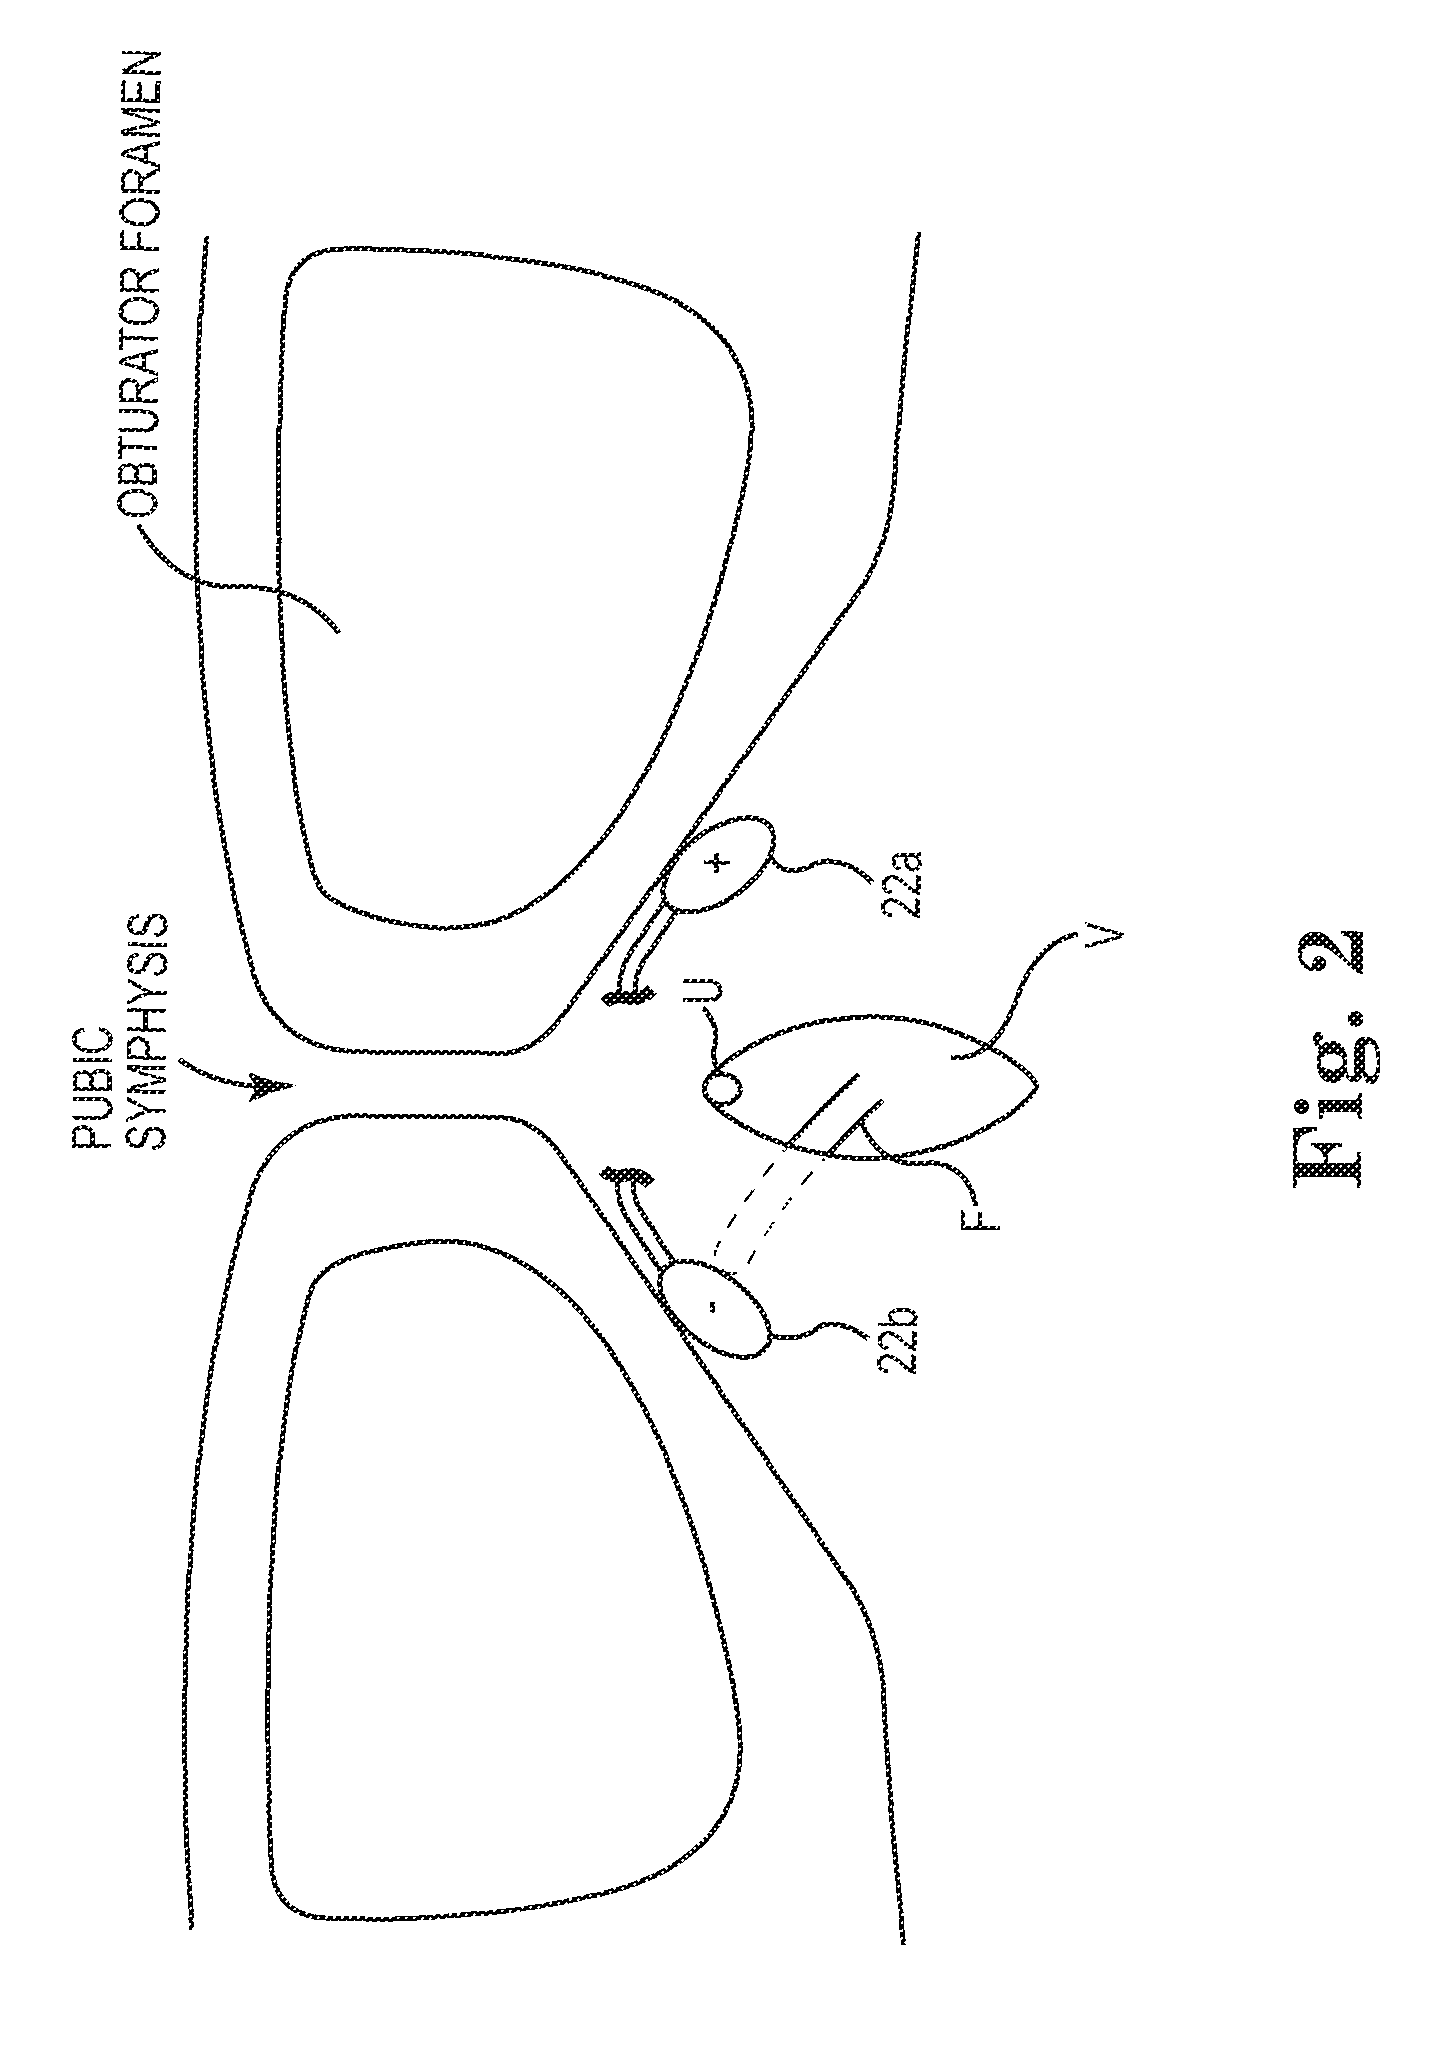 Implant tension adjustment system and method